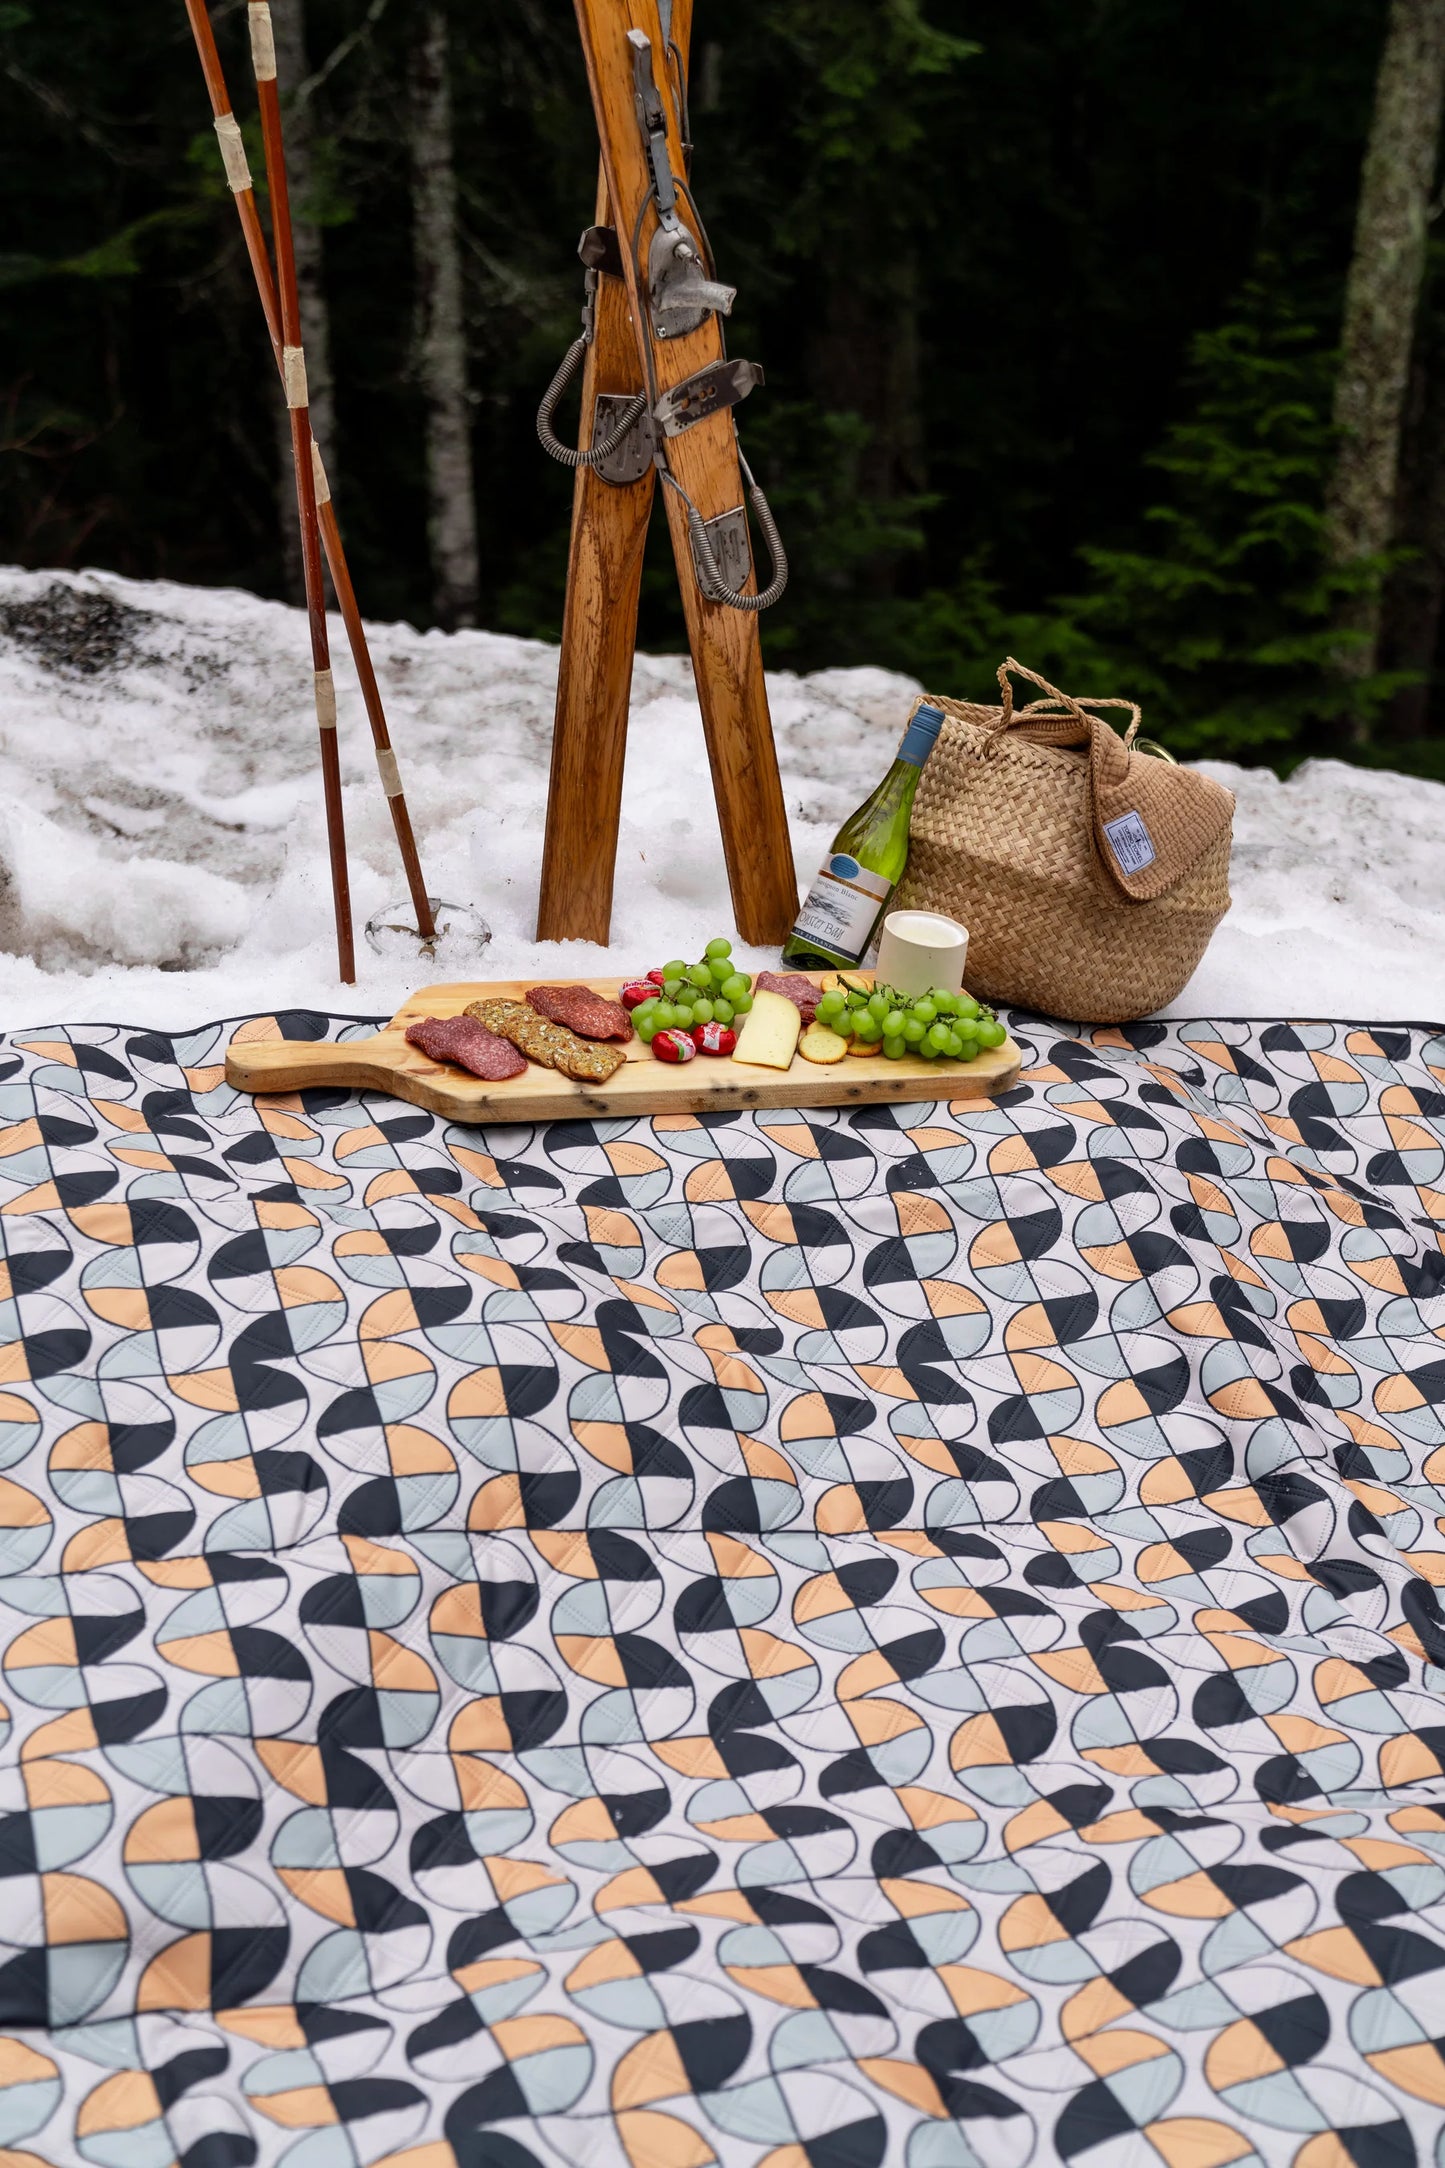 The Excursion Packable Picnic Blanket